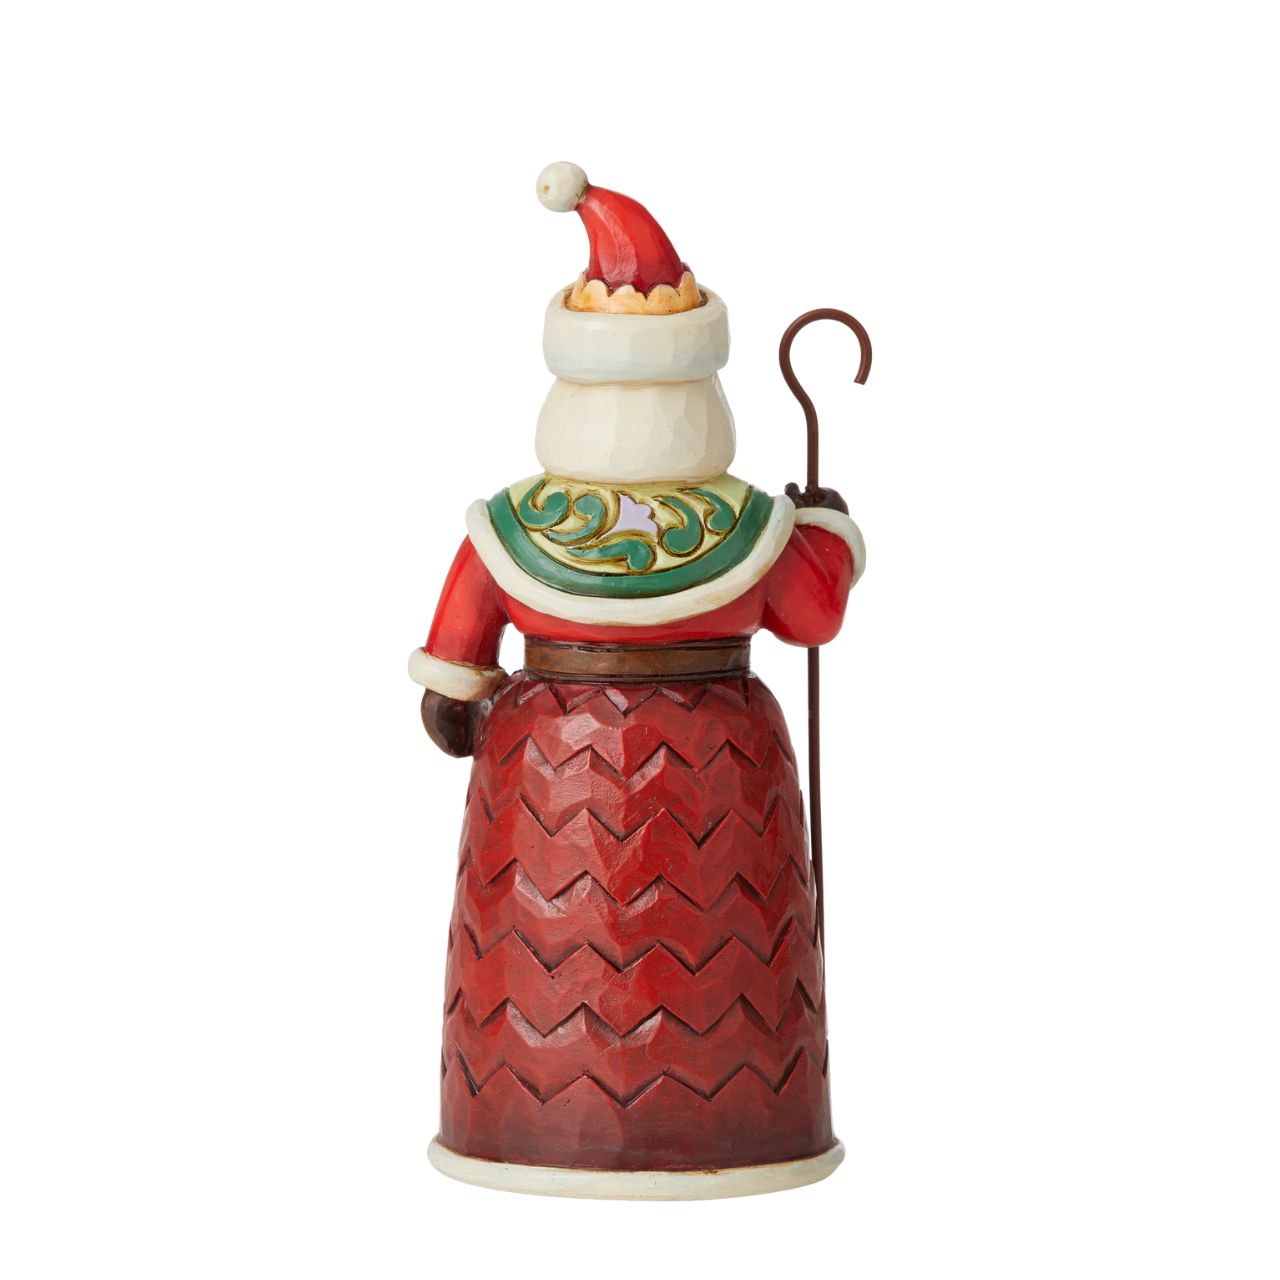 Heartwood Creek Santa with Holly Pint Sized Figurine by Jim Shore  "Ivy, Holly, and Days So Jolly" This pint sized Santa is ideal for stocking fillers, small spaces and displays. Designed with the iconic Heartwood Creek by Jim Shore style, he comes with a staff and an intricate design of holly on his skirt.